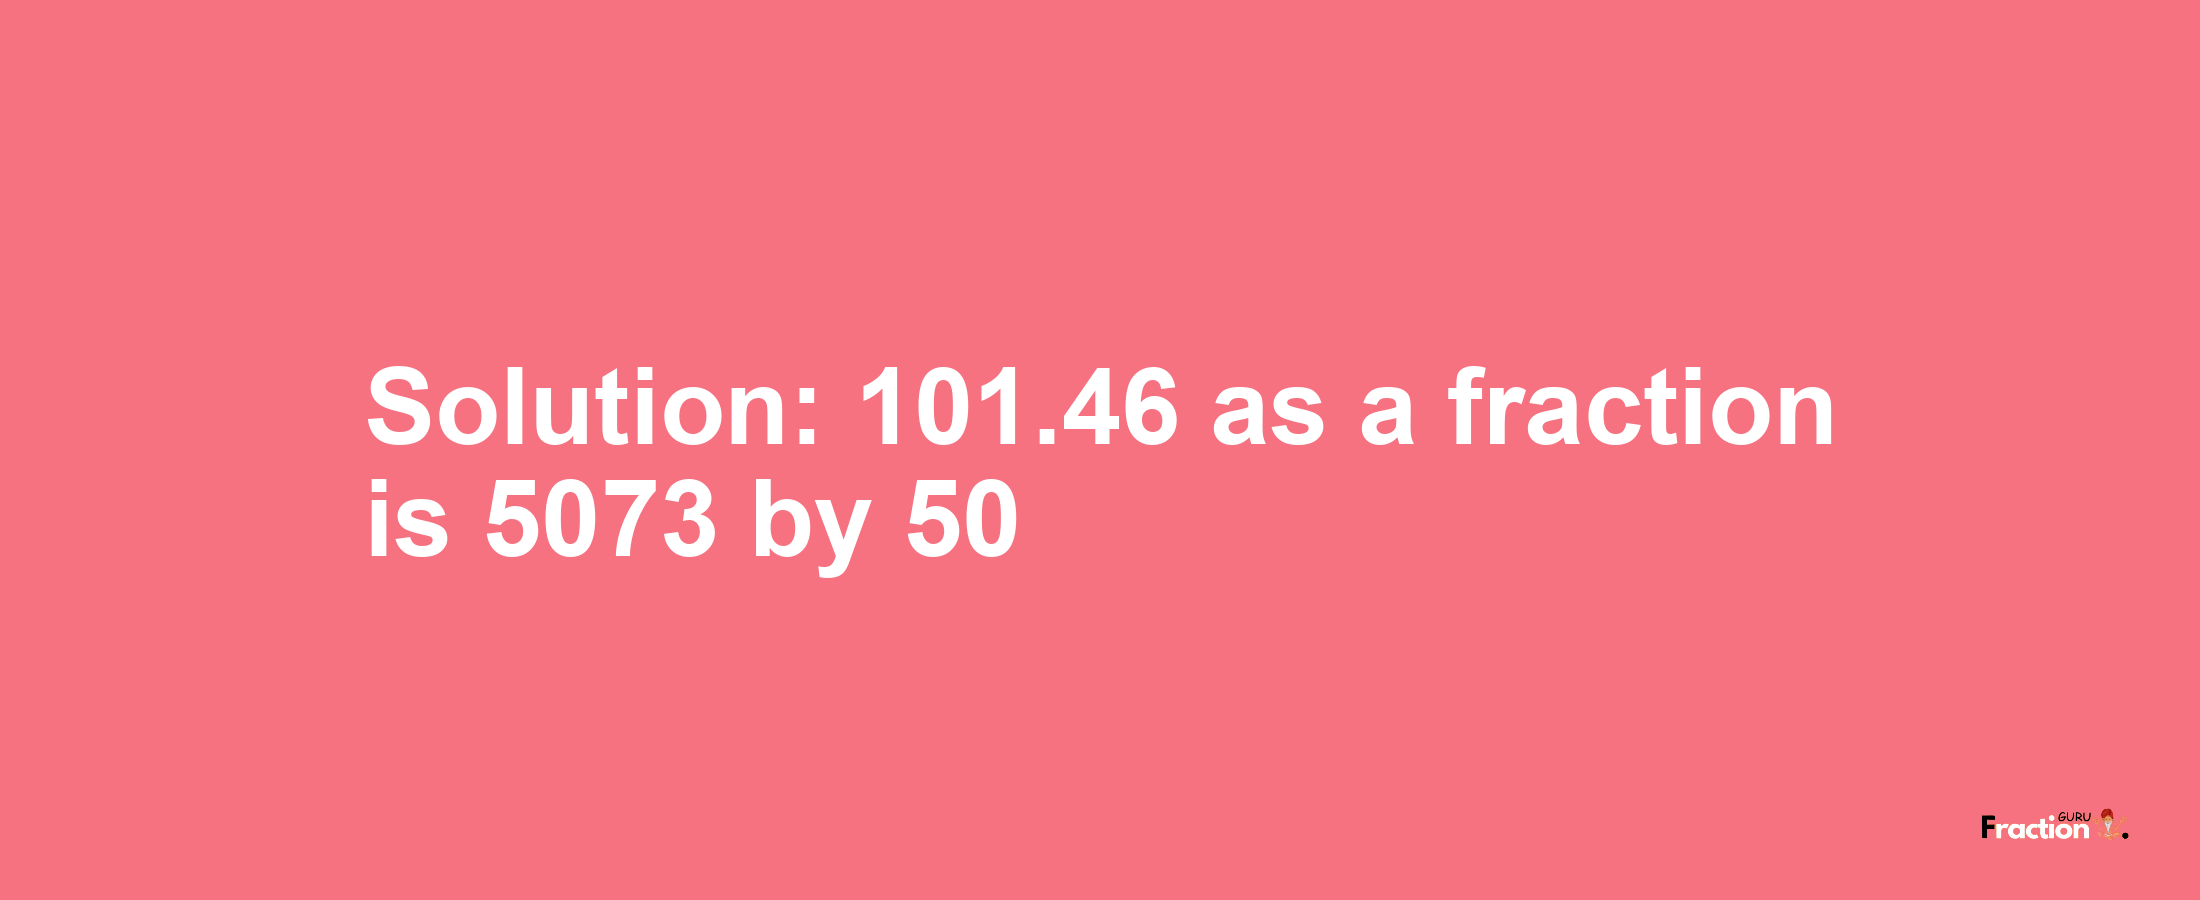 Solution:101.46 as a fraction is 5073/50